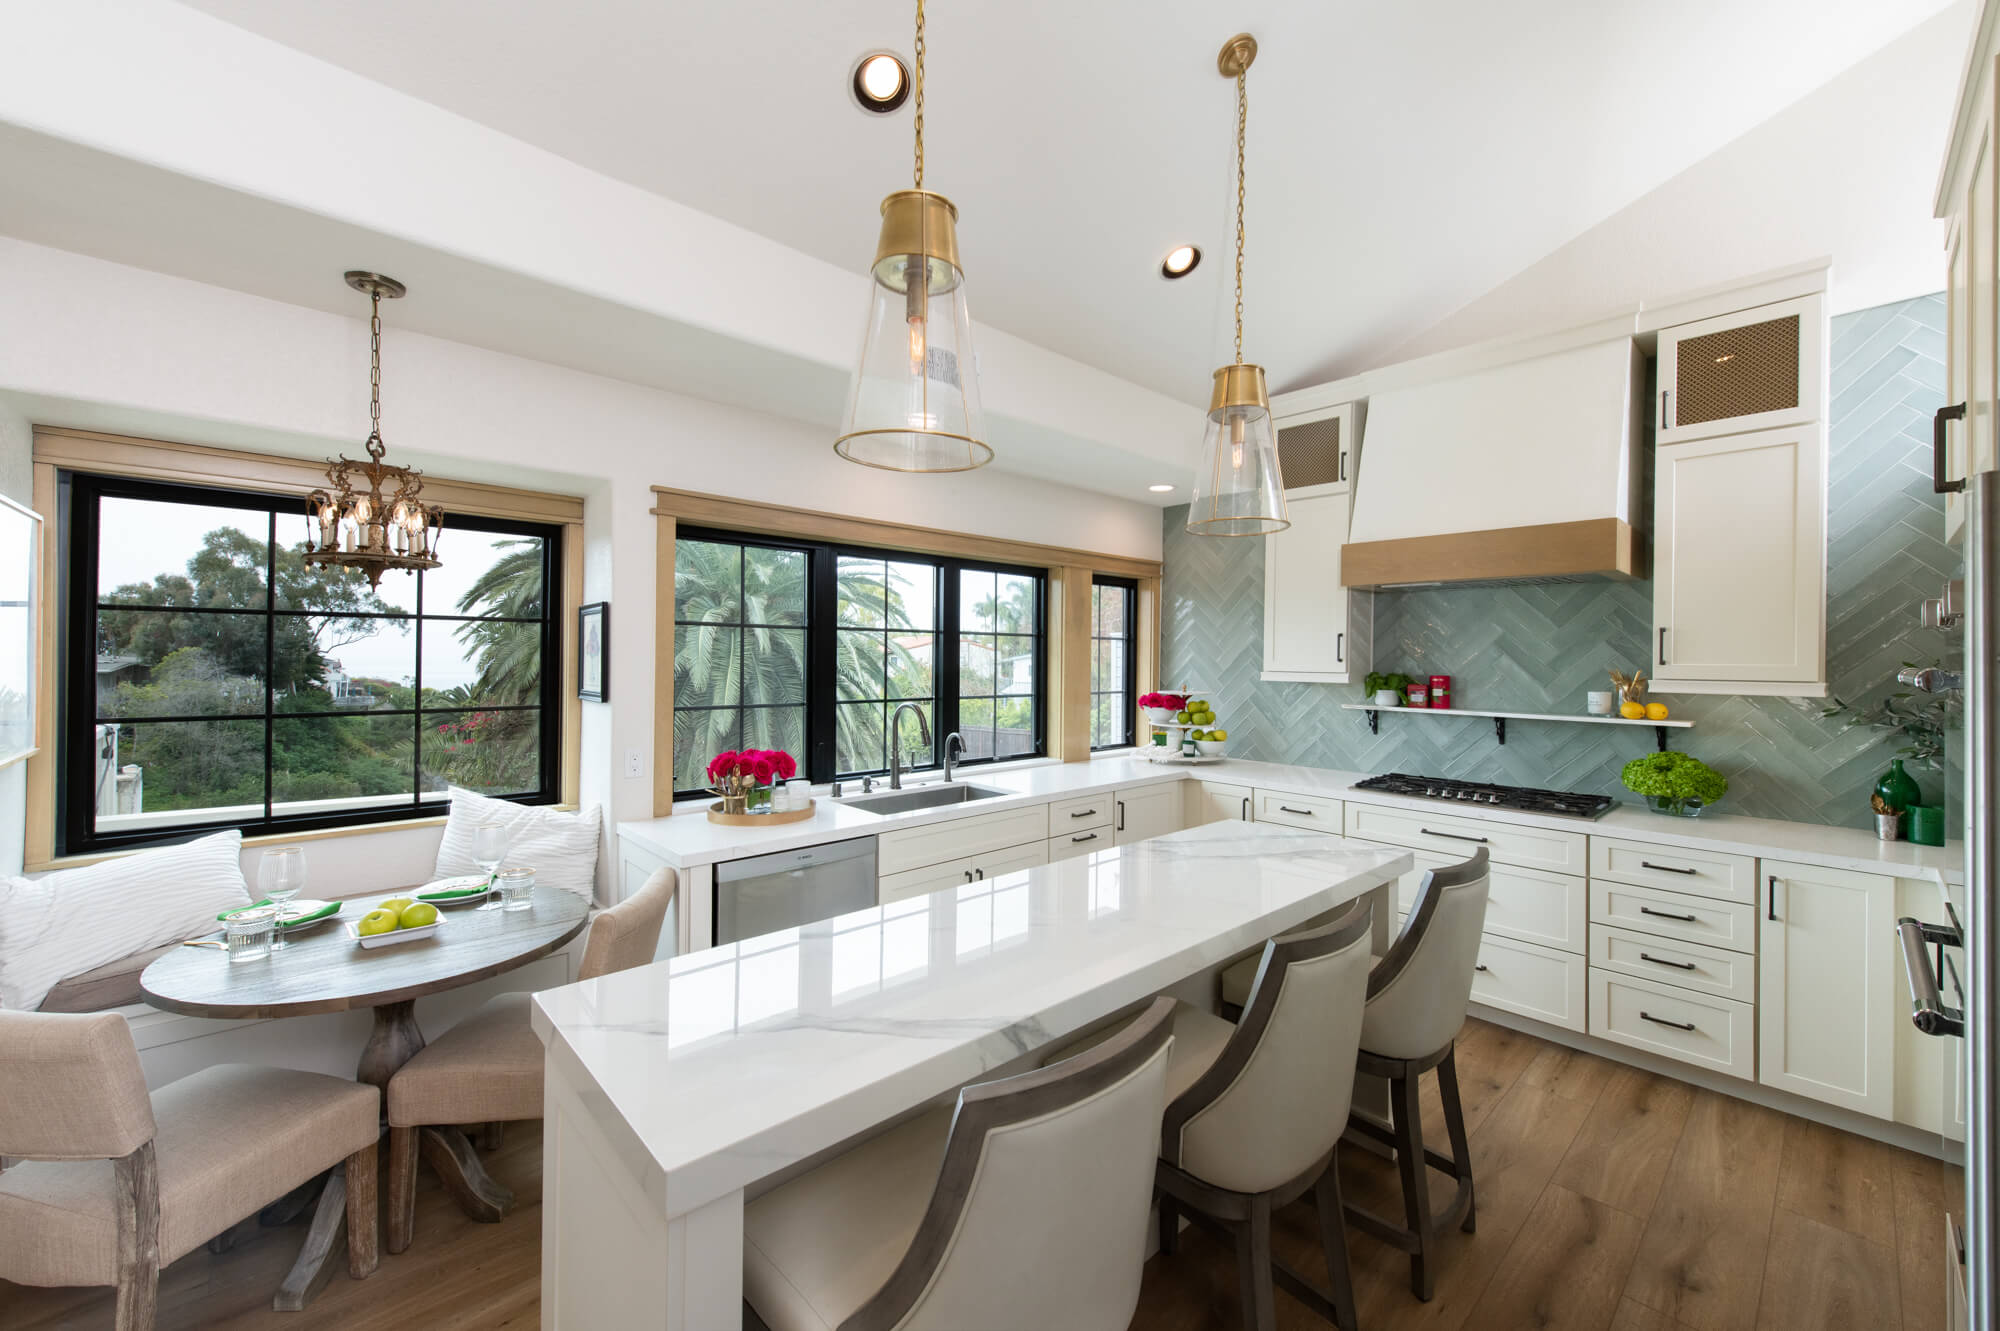 San-Clemente-kitchen-remodel-with-new-cabinets-countertop-backsplash-lighting - kitchen design features